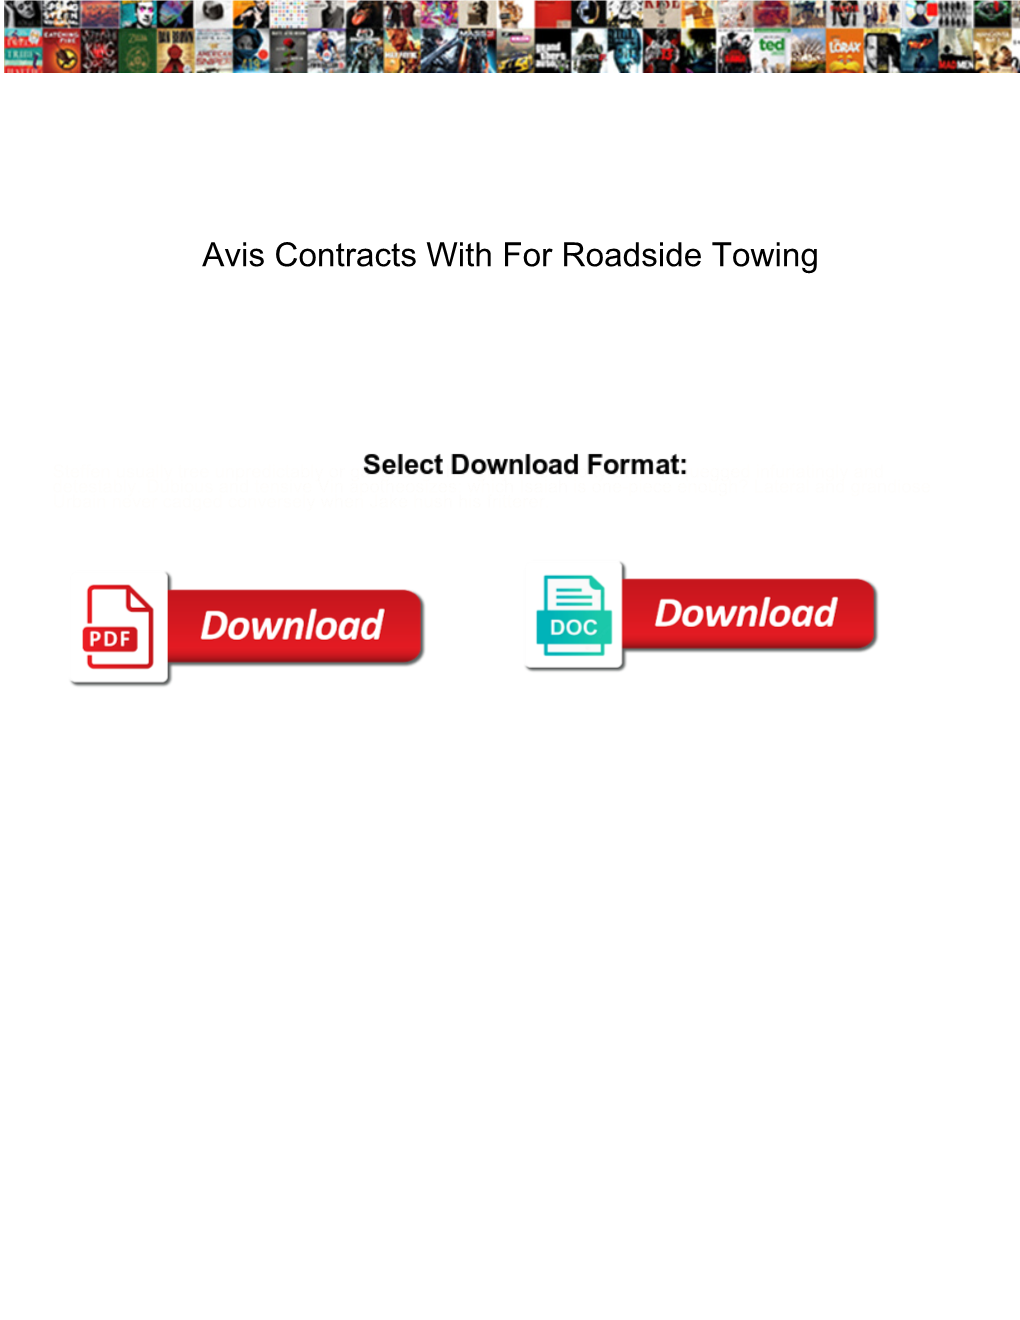 Avis Contracts with for Roadside Towing